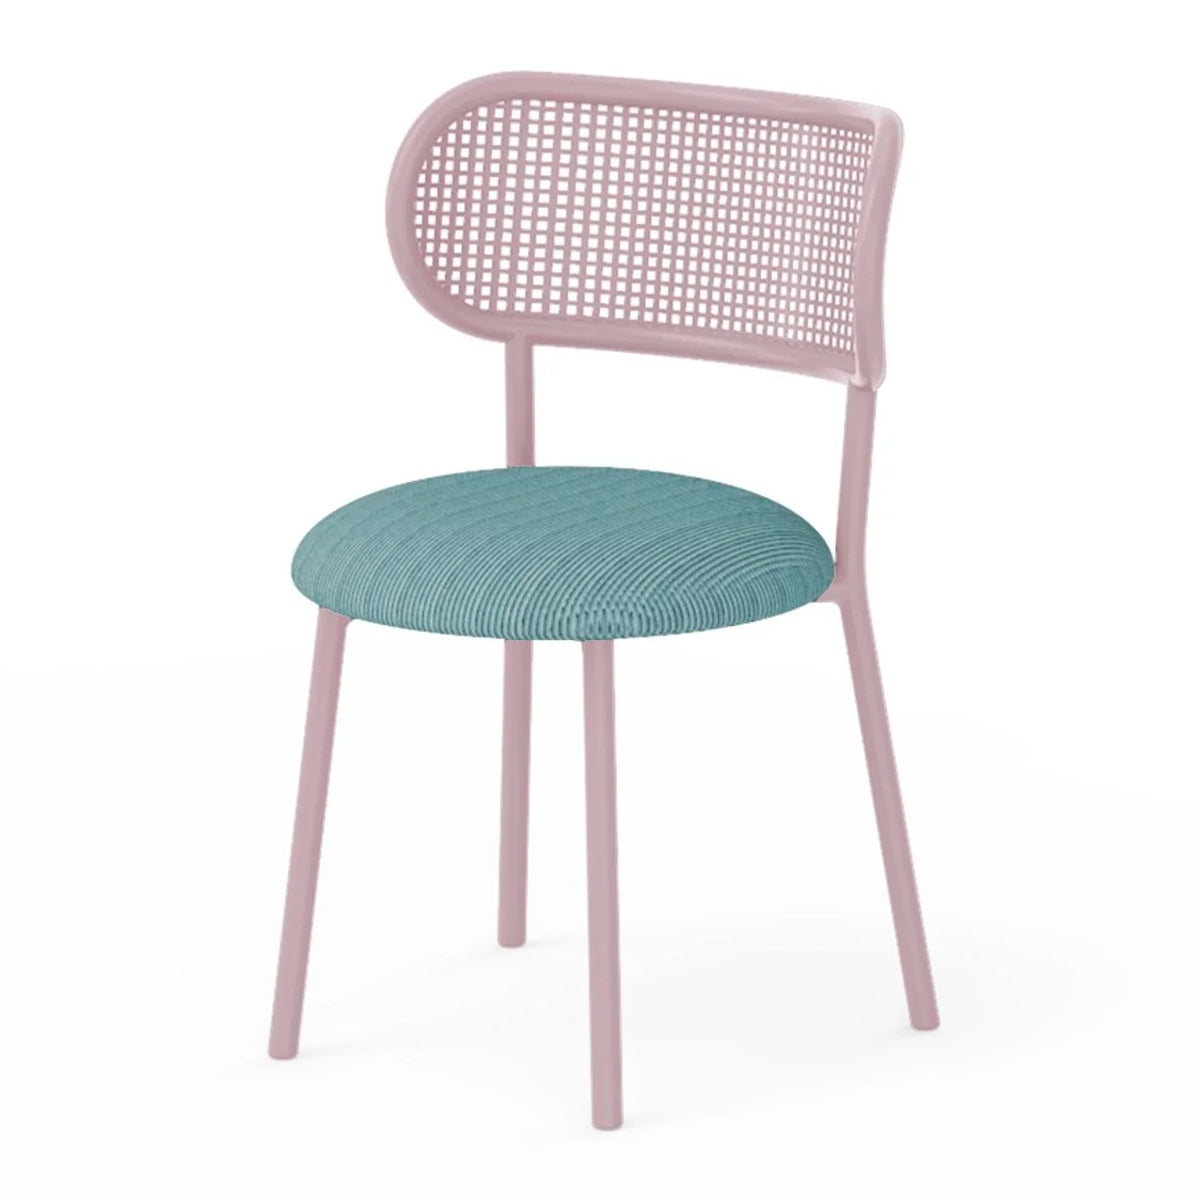 Louise Chair by Mambo Unlimited Ideas | Do Shop